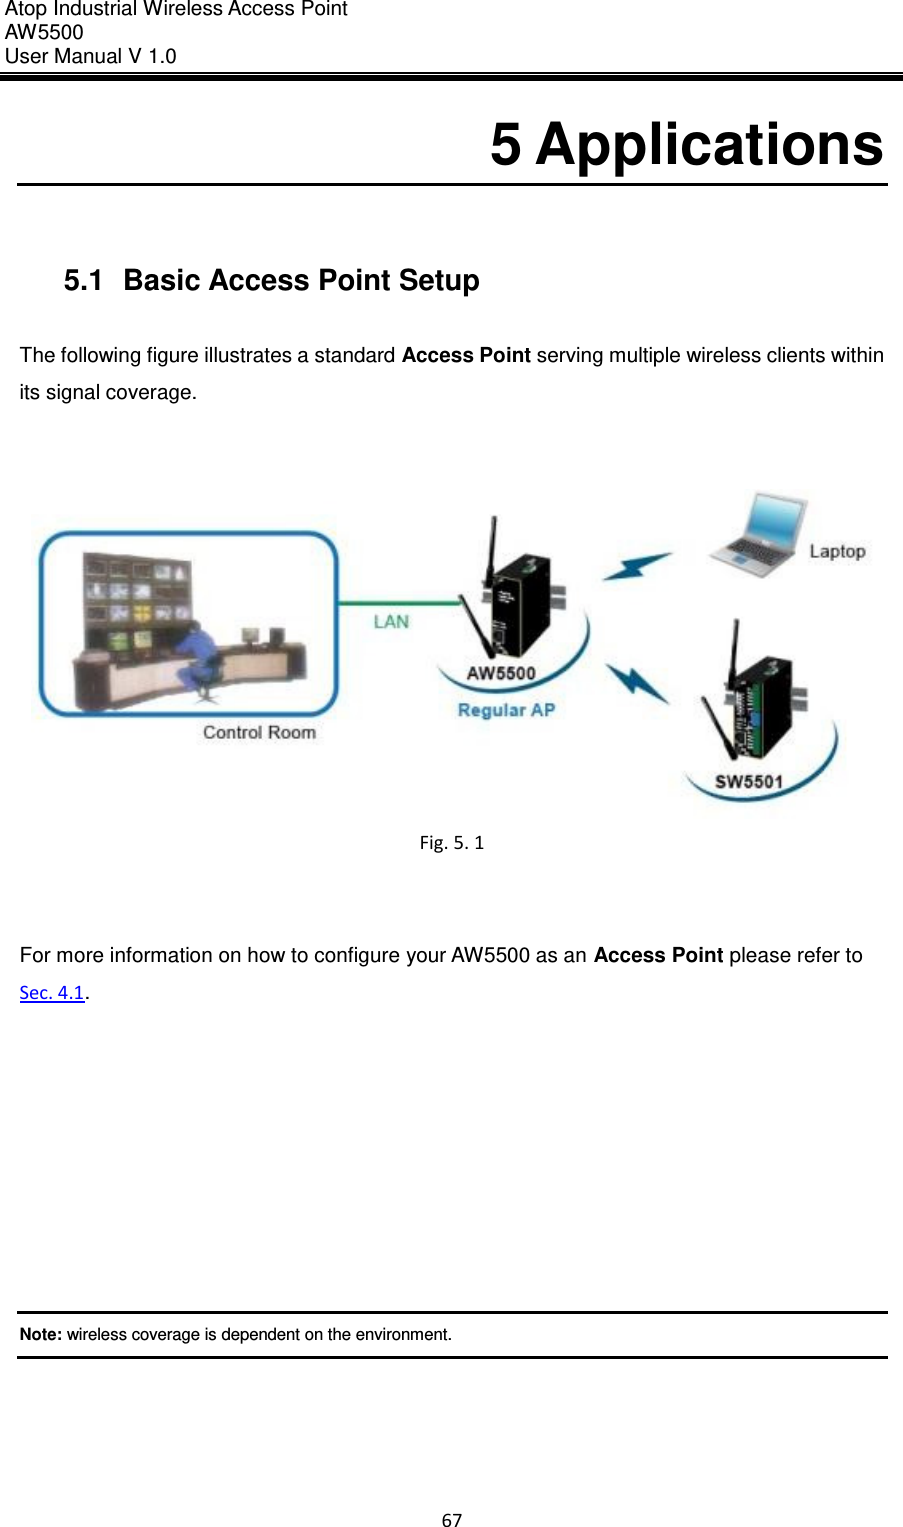 Atop Industrial Wireless Access Point AW 5500 User Manual V 1.0                      67  5 Applications   5.1  Basic Access Point Setup  The following figure illustrates a standard Access Point serving multiple wireless clients within its signal coverage.    Fig. 5. 1   For more information on how to configure your AW5500 as an Access Point please refer to Sec. 4.1.         Note: wireless coverage is dependent on the environment.     